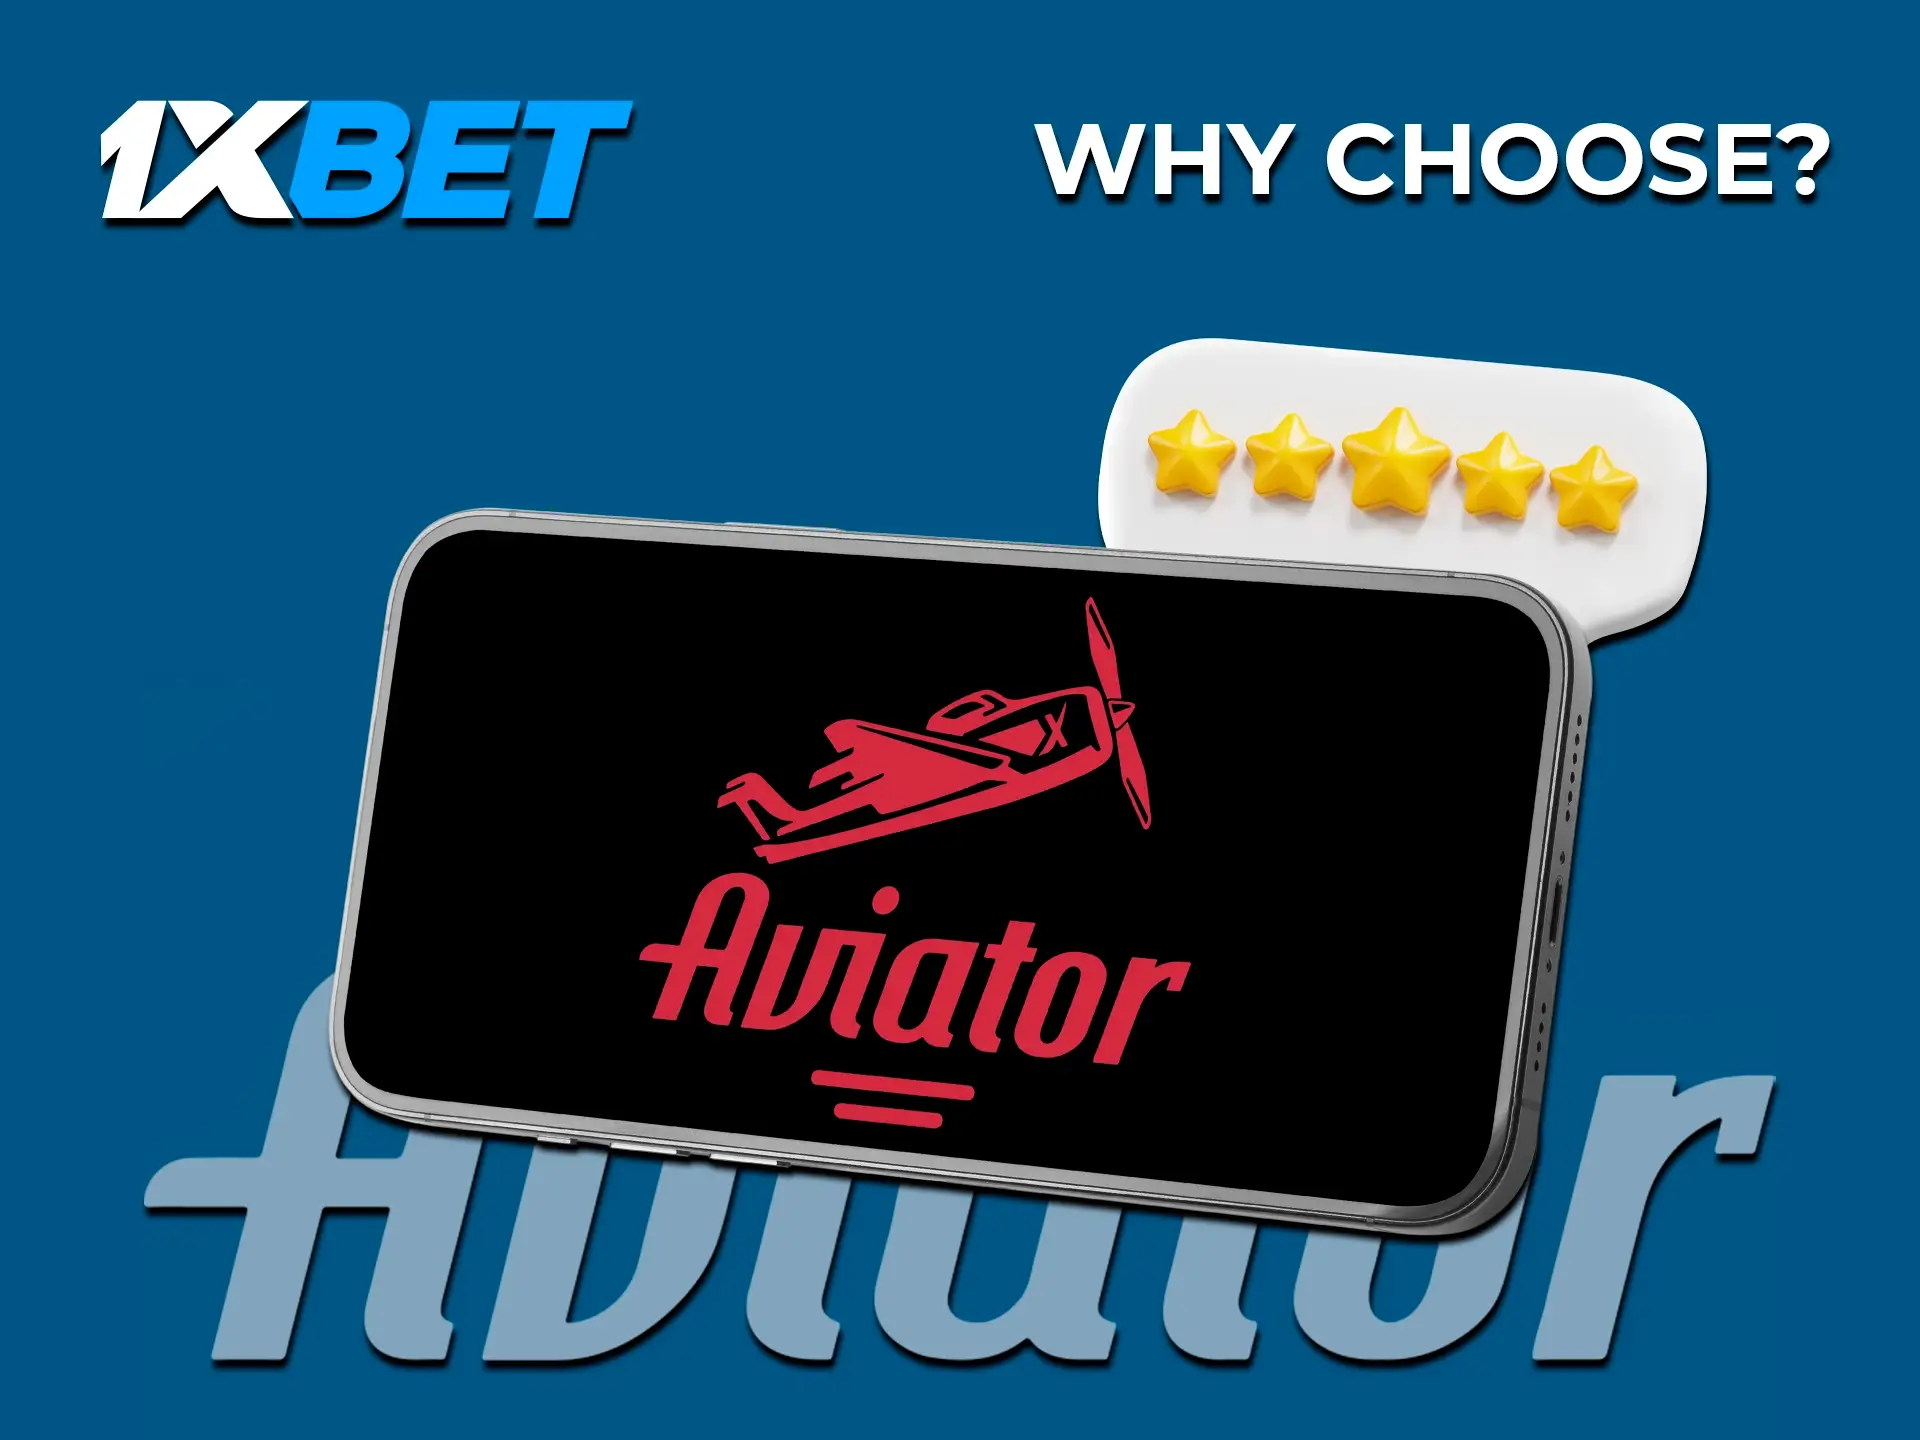 Use 1xBet casino, which has earned its big name with the best service and high data protection.